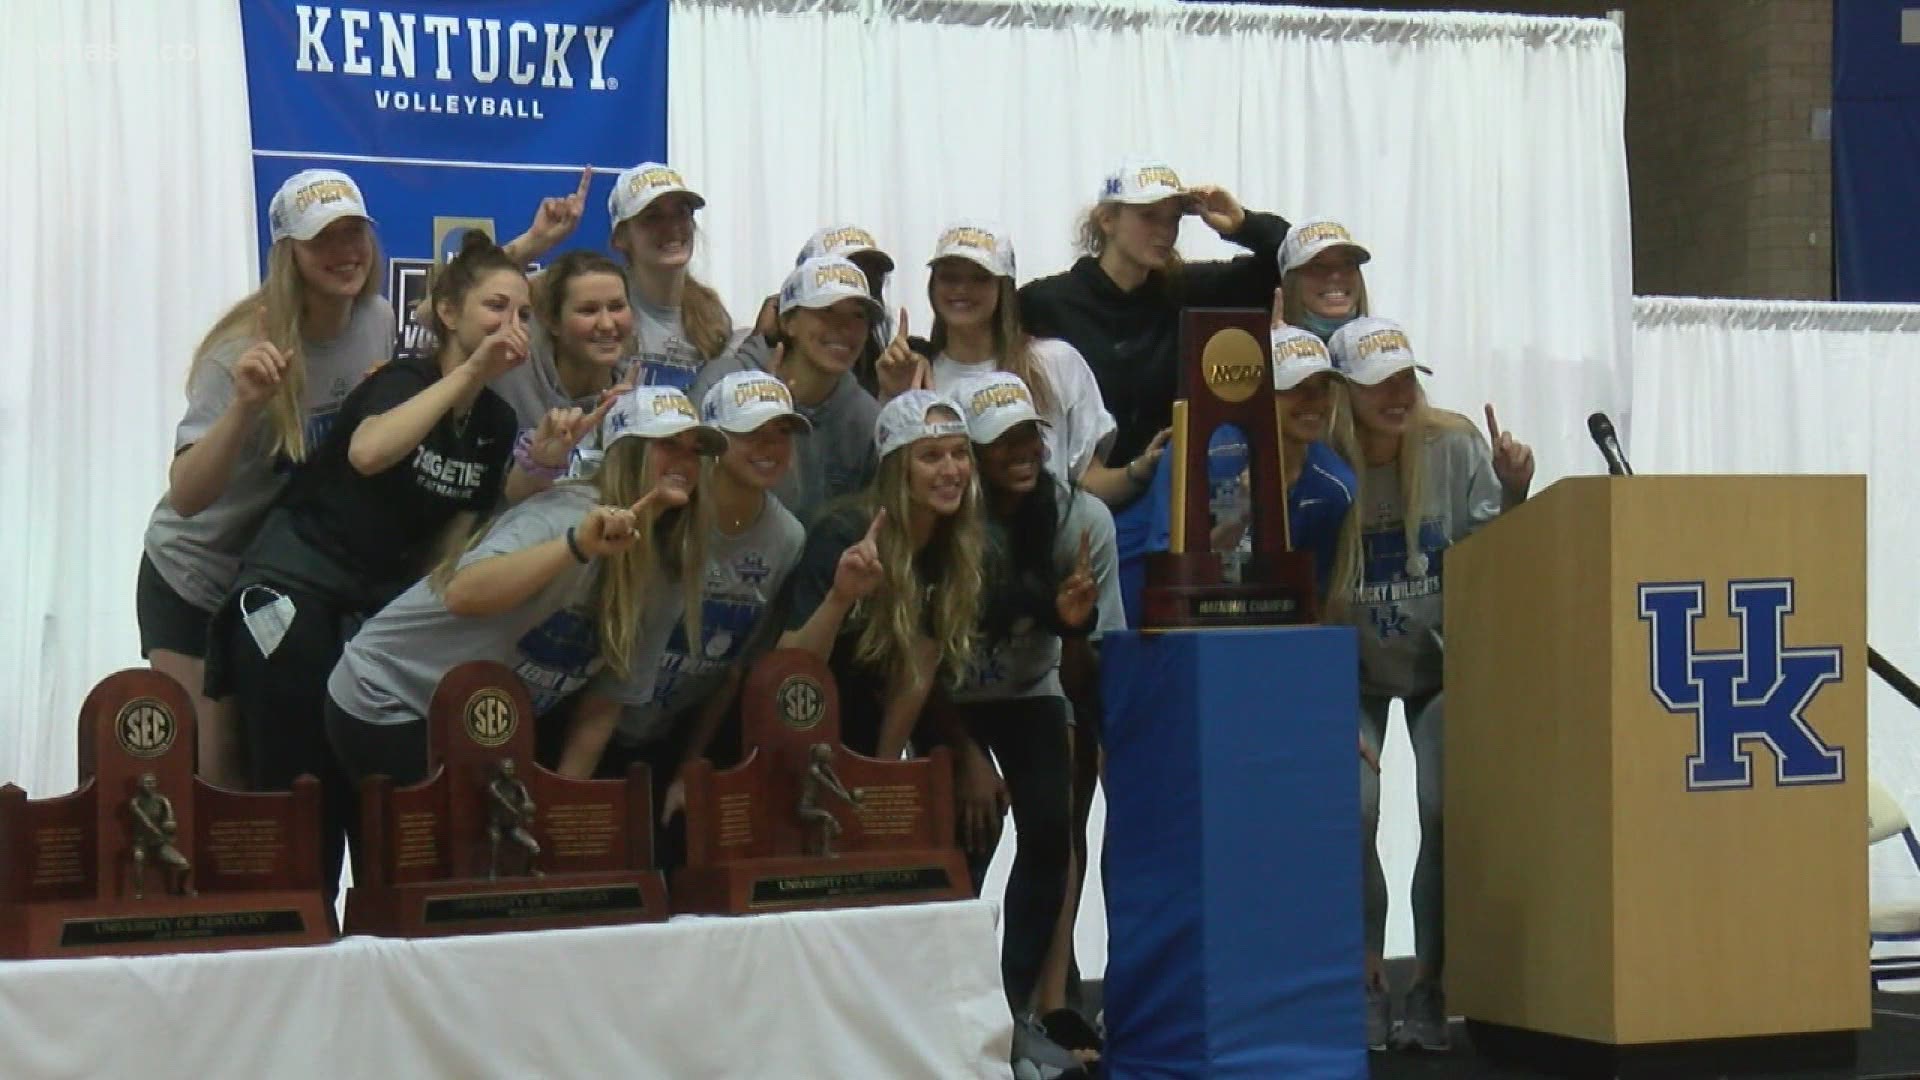 A packed Memorial Coliseum in Lexington welcomed the Wildcats back one day after clinching their first national championship.